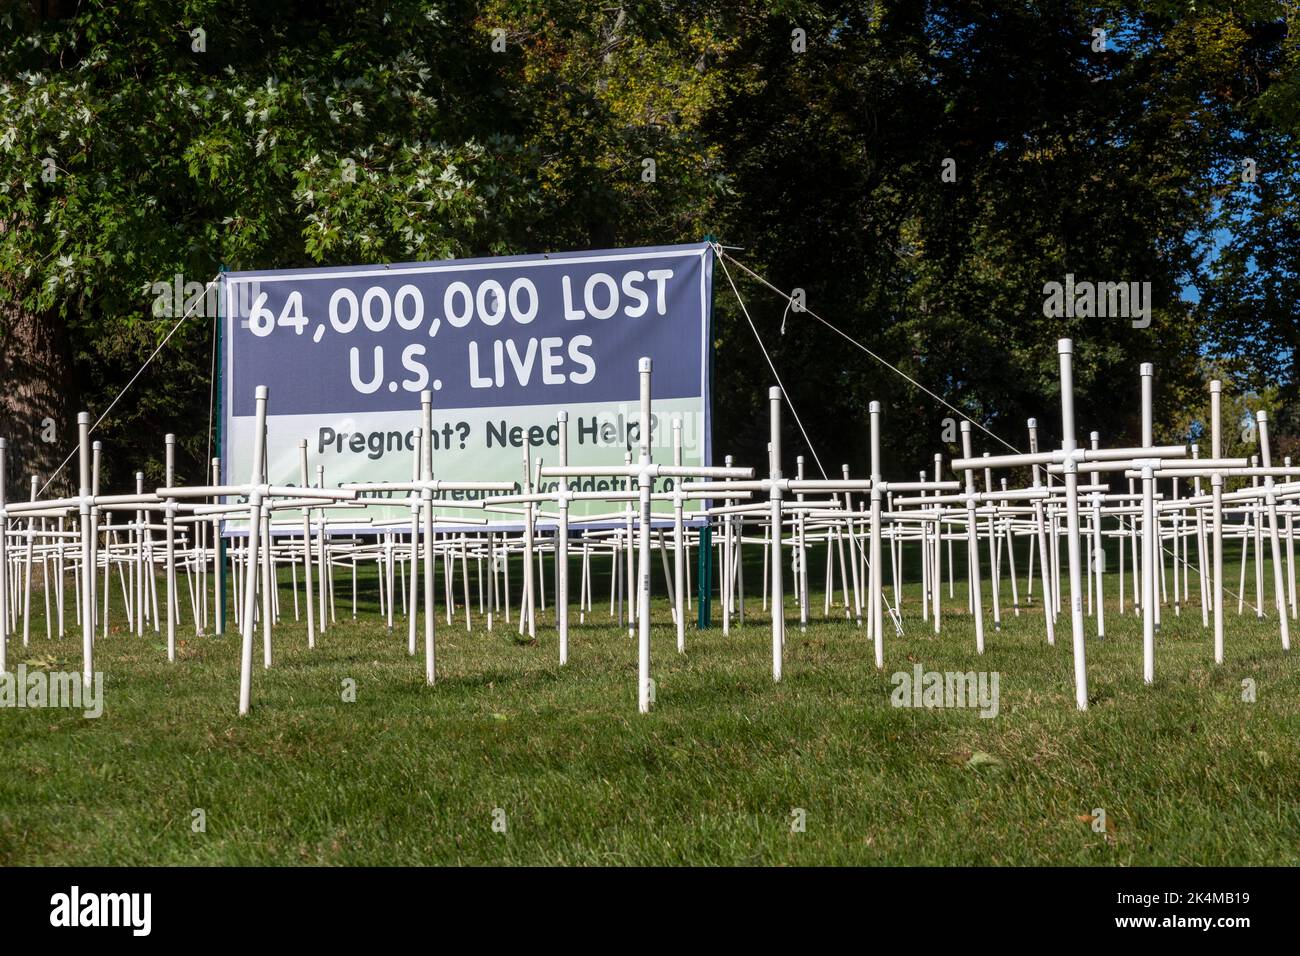 Grosse Pointe Farms, Michigan, USA. 3rd Oct, 2022. As Michigan prepares to vote on Proposal 3, which would enshrine the right to abortion in the state's constitution, St. Paul on the Lake Catholic Church displays dozens of crosses on its lawn, with signs opposing the measure. The display has become controversial; city resident Edsel Ford II said it 'diminish[es] the character of our neighborhood.' Credit: Jim West/Alamy Live News Stock Photo